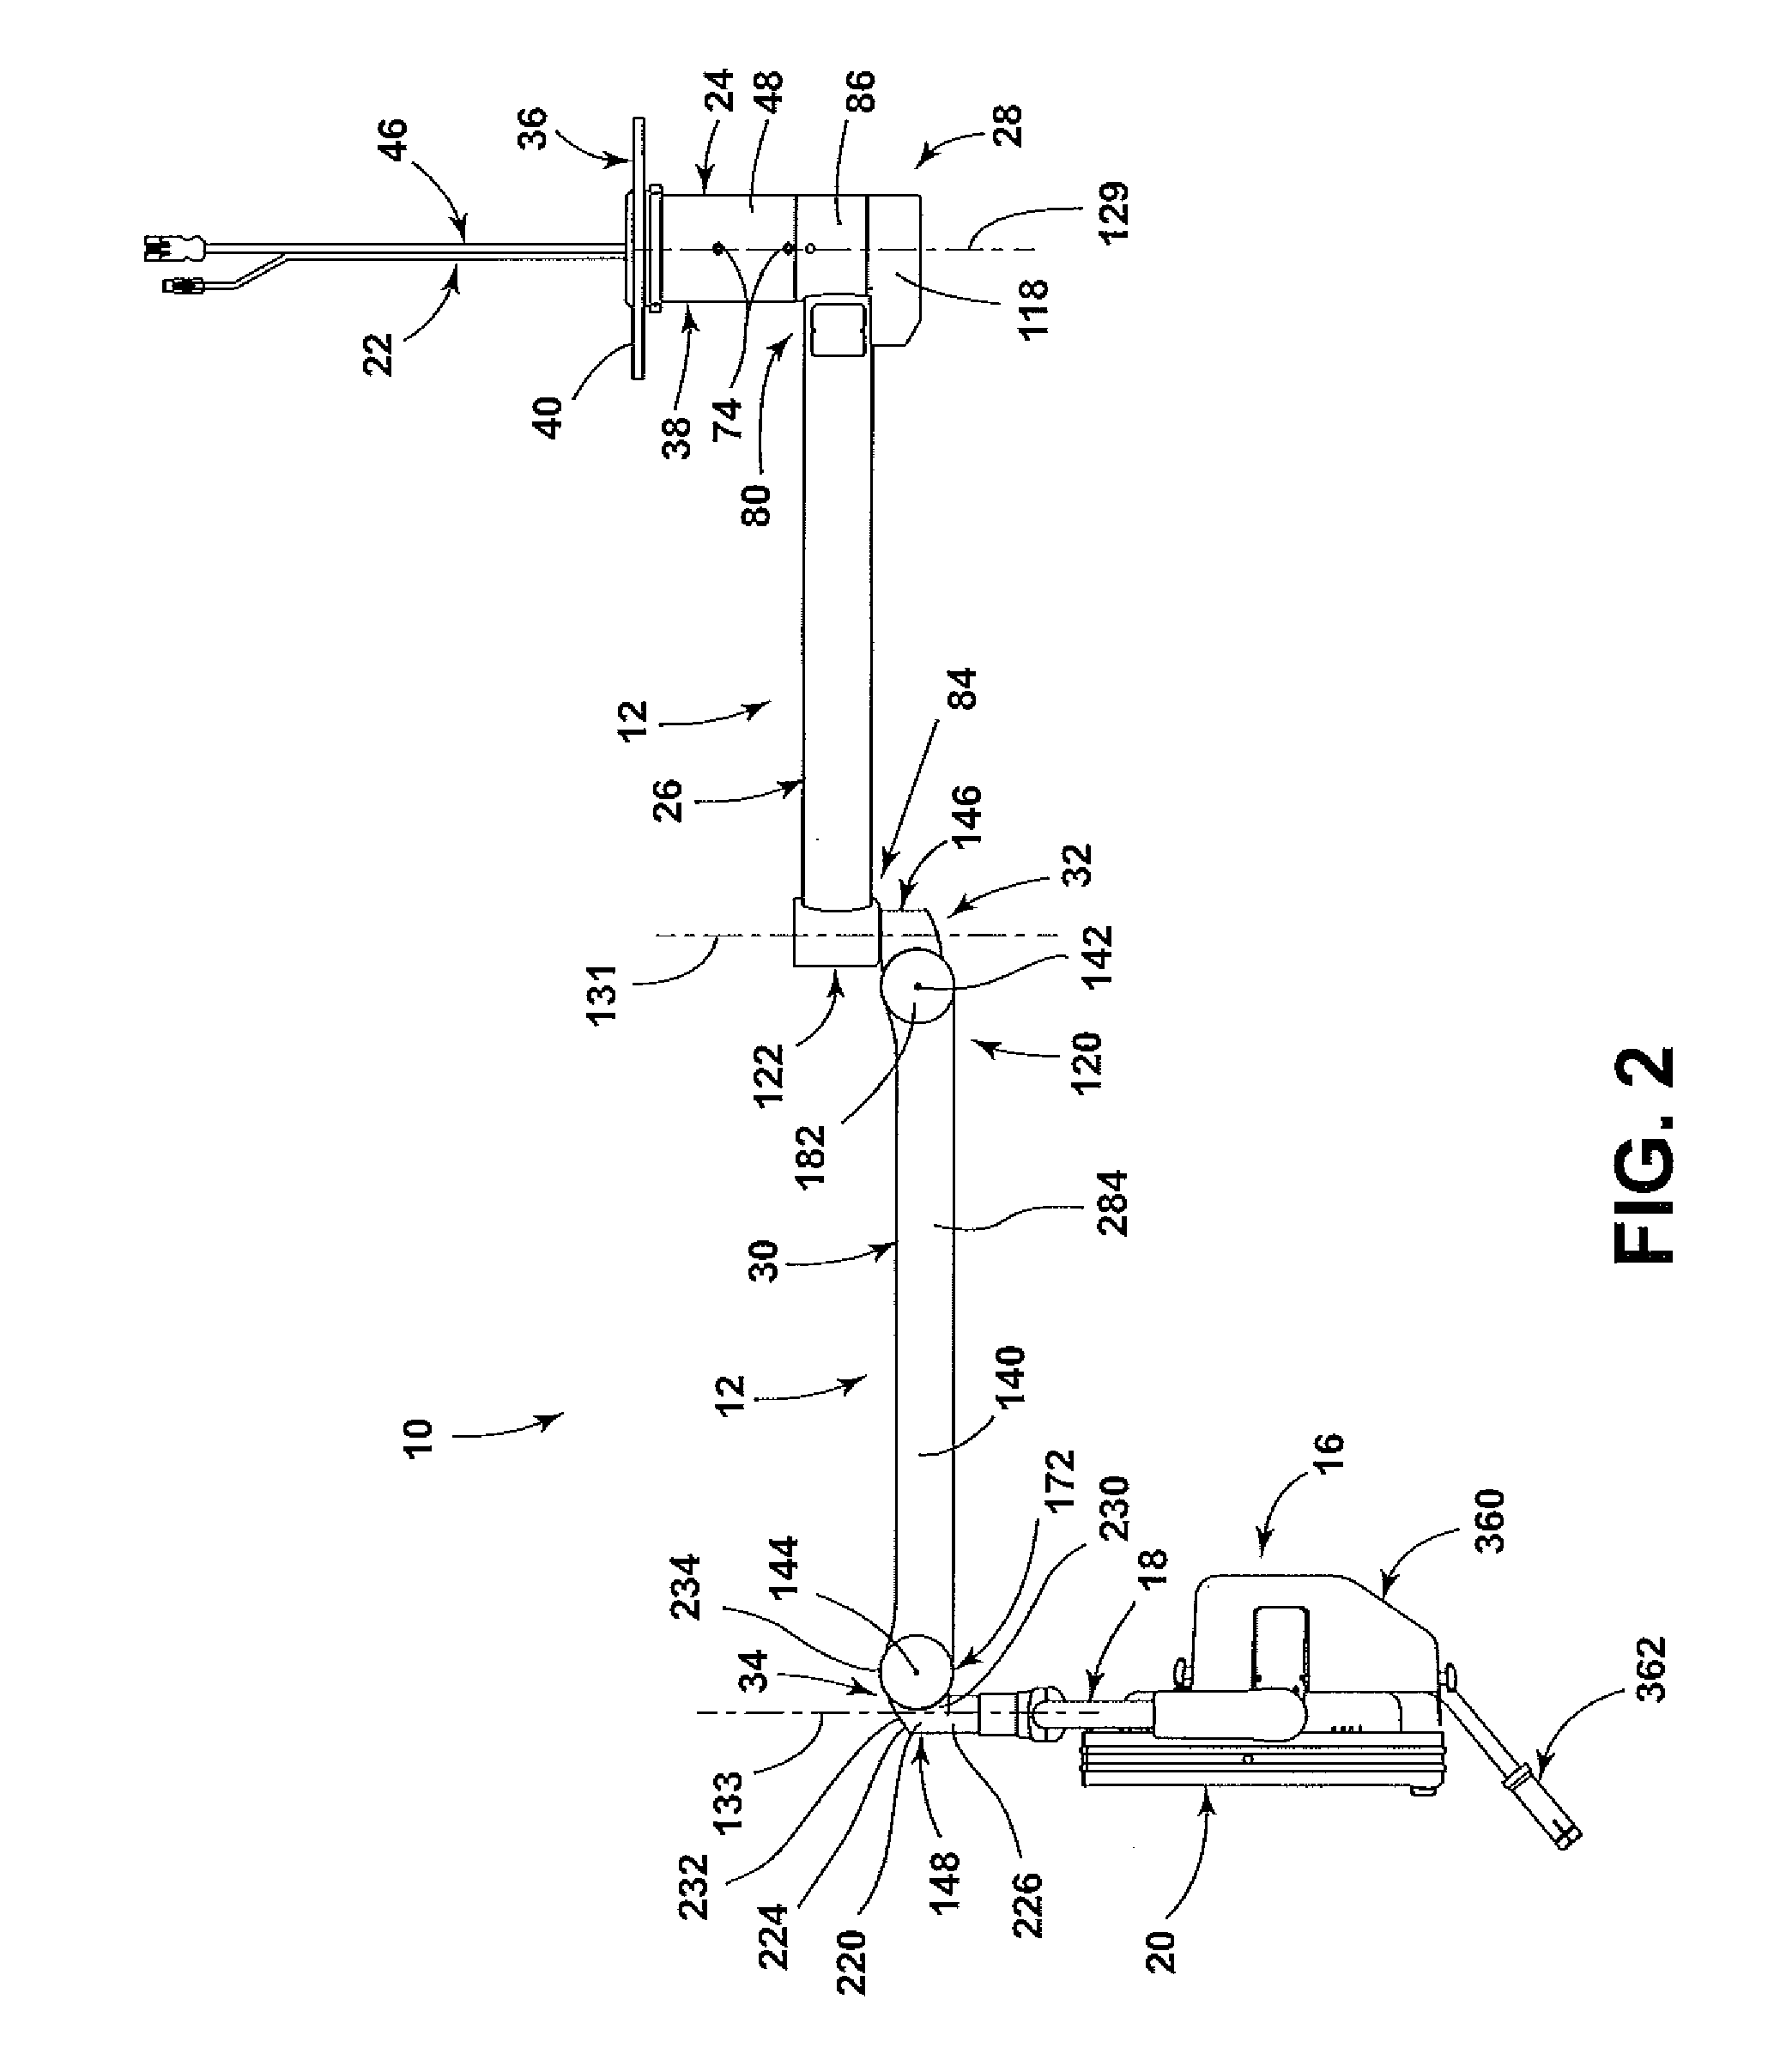 Fiber optic and slip ring rotary joint for suspension arm